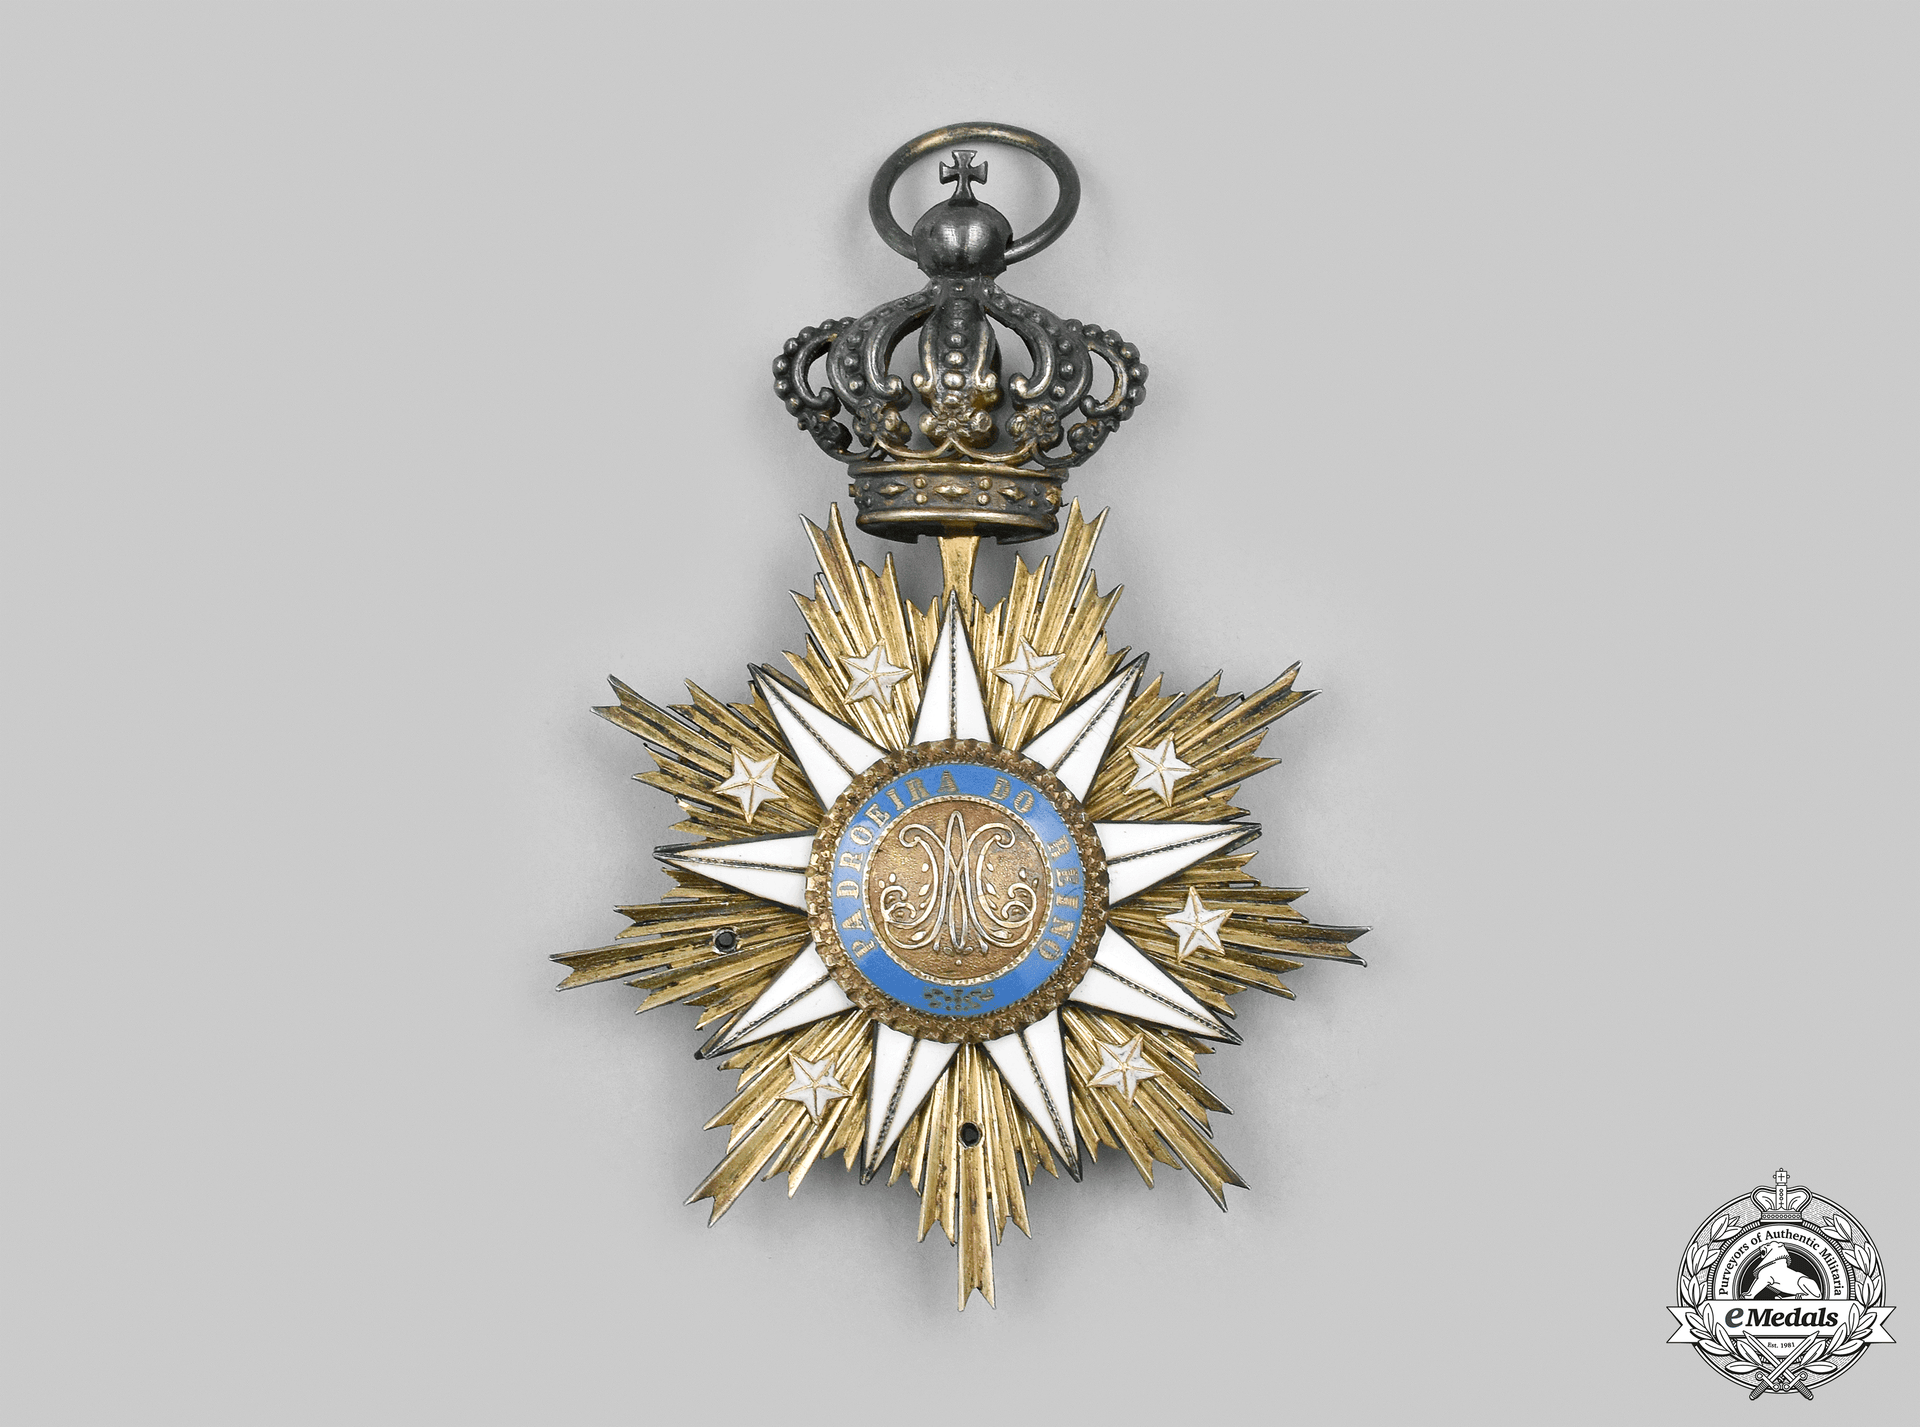 portugal,_kingdom._an_order_of_the_immaculate_conception_of_vila_viçosa,_i_class_grand_cross_badge,_c.1900_m21_mnc4504